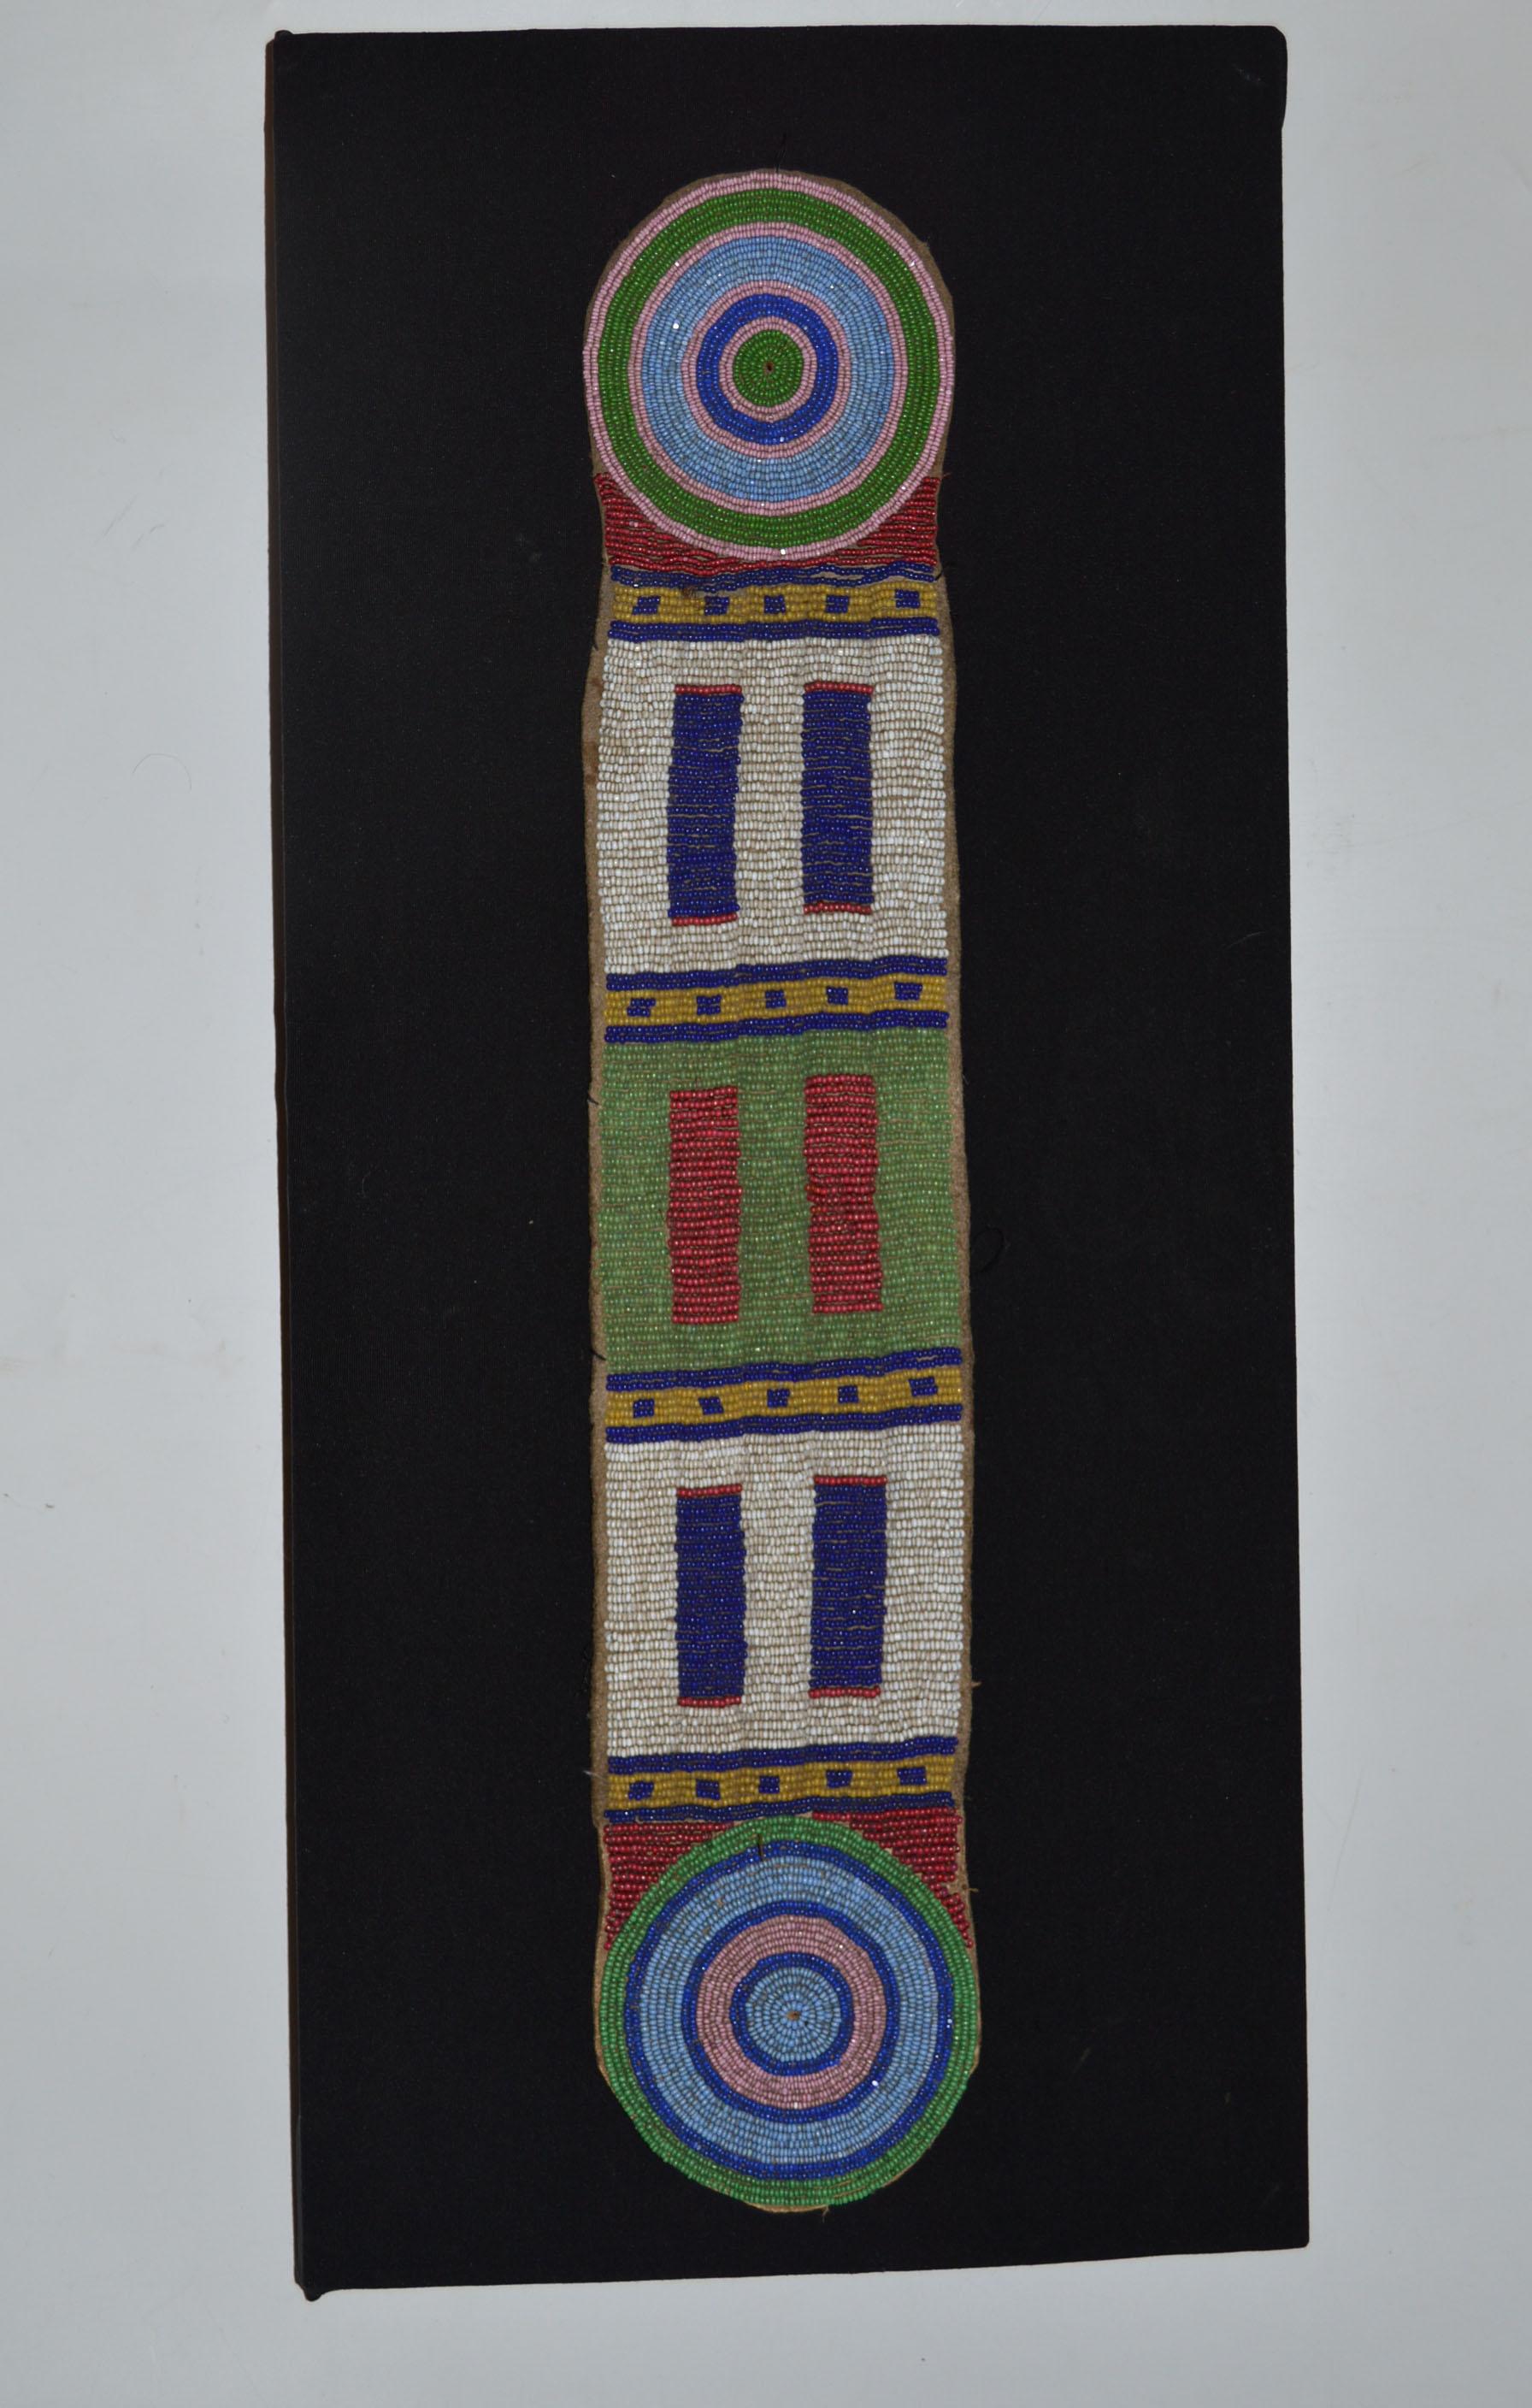 Fine old native American plains beaded strip Sioux
A beautiful plains Sioux panel very finely beaded on buck skin with geometric designs
A perfectly balanced design in both color and symmetry
Mounted on a black cloth covered frame
Period: Last